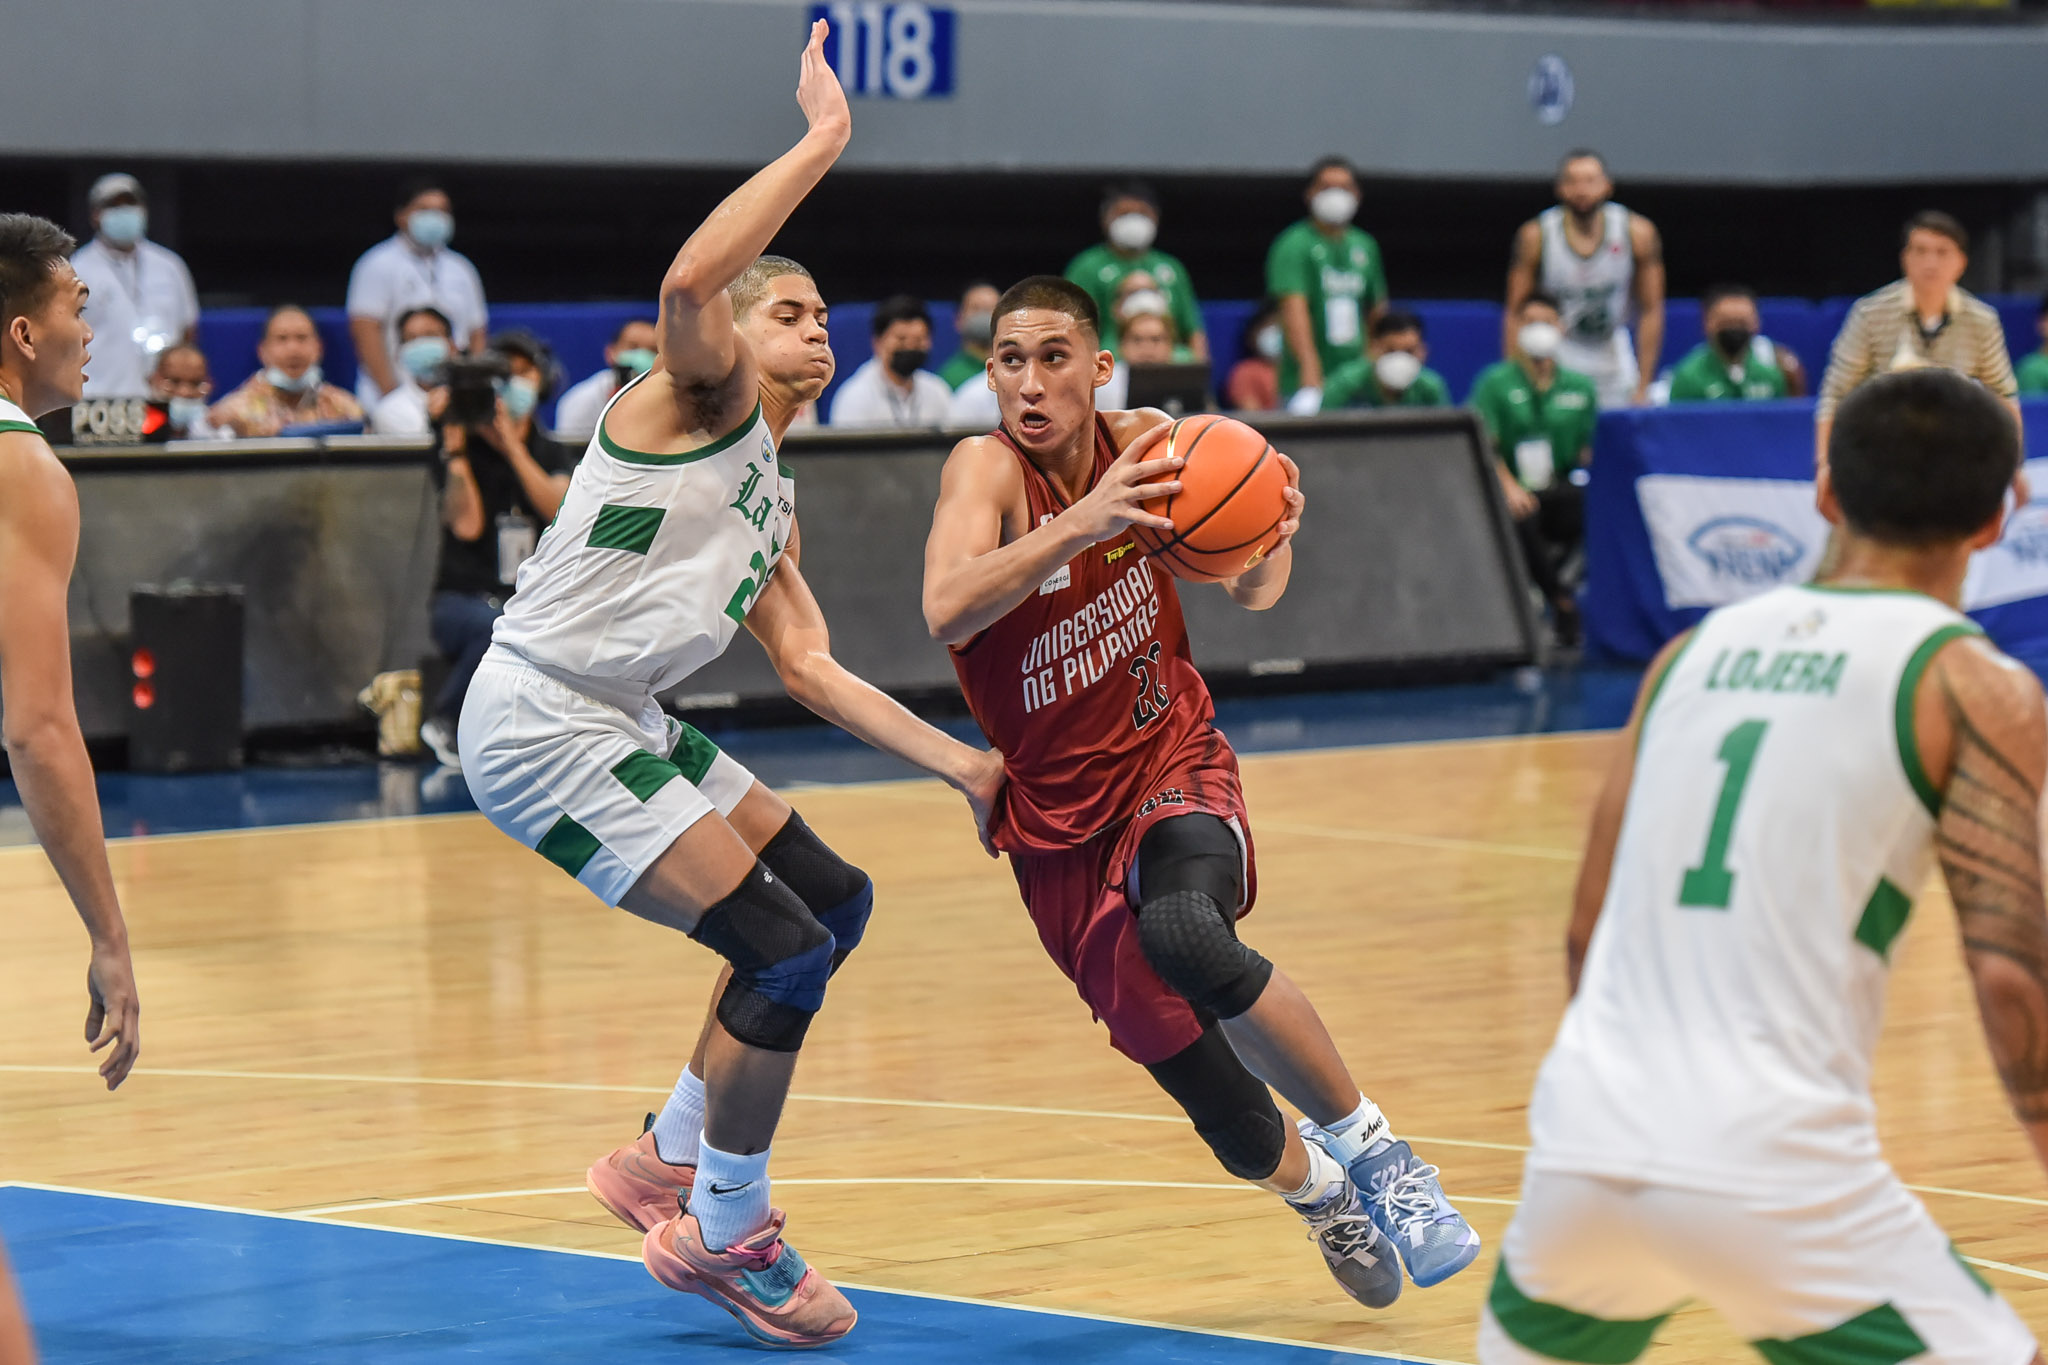 Lucero-Cagulangan Duo Sparked UP’s Endgame Run to Grab Fifth Straight Win and Solo Second Spot